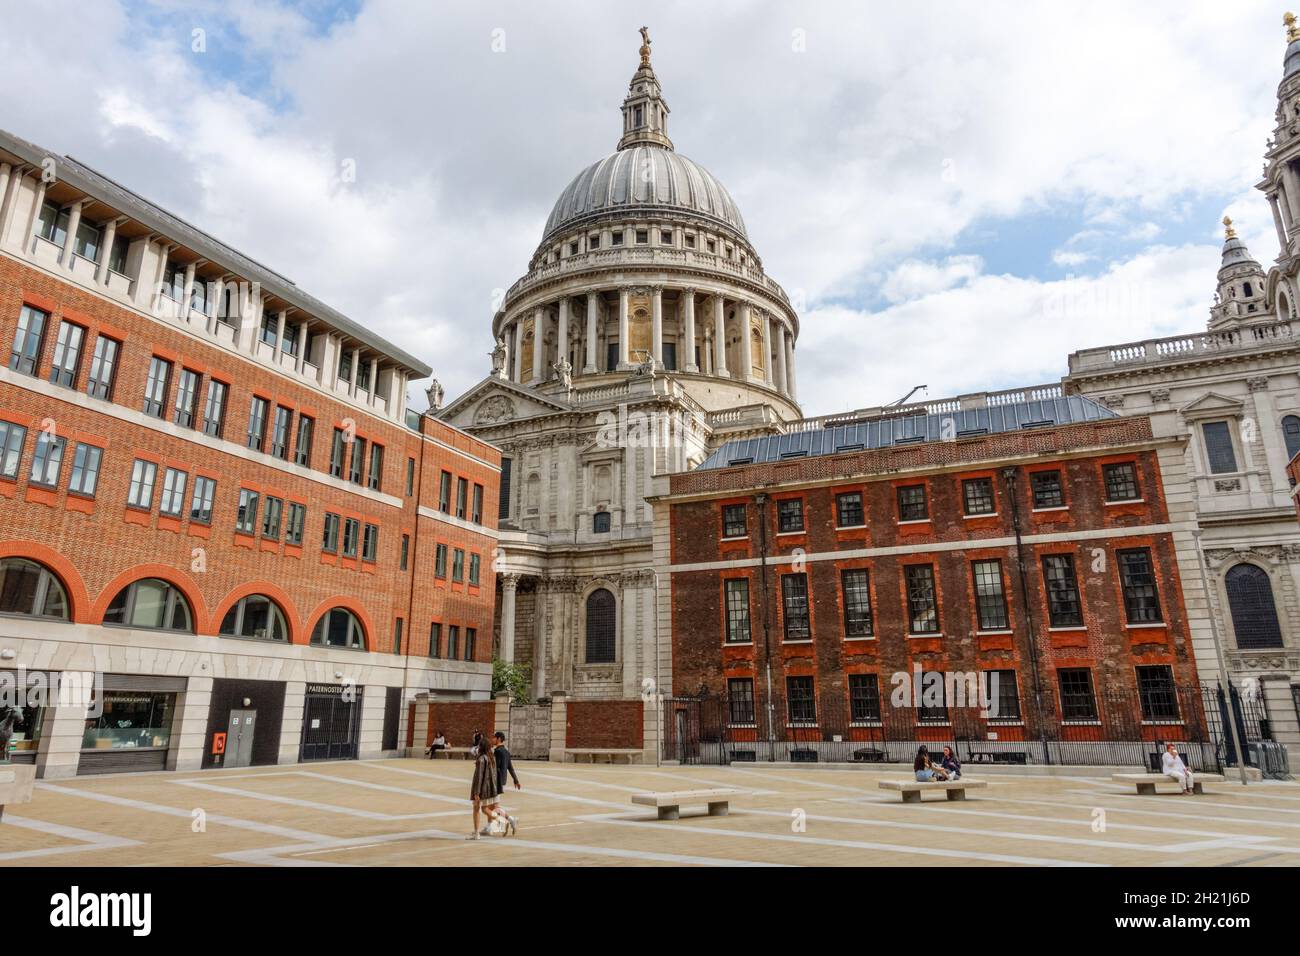 St Paul's Cathedral seen from Paternoster Square, London England United Kingdom UK Stock Photo